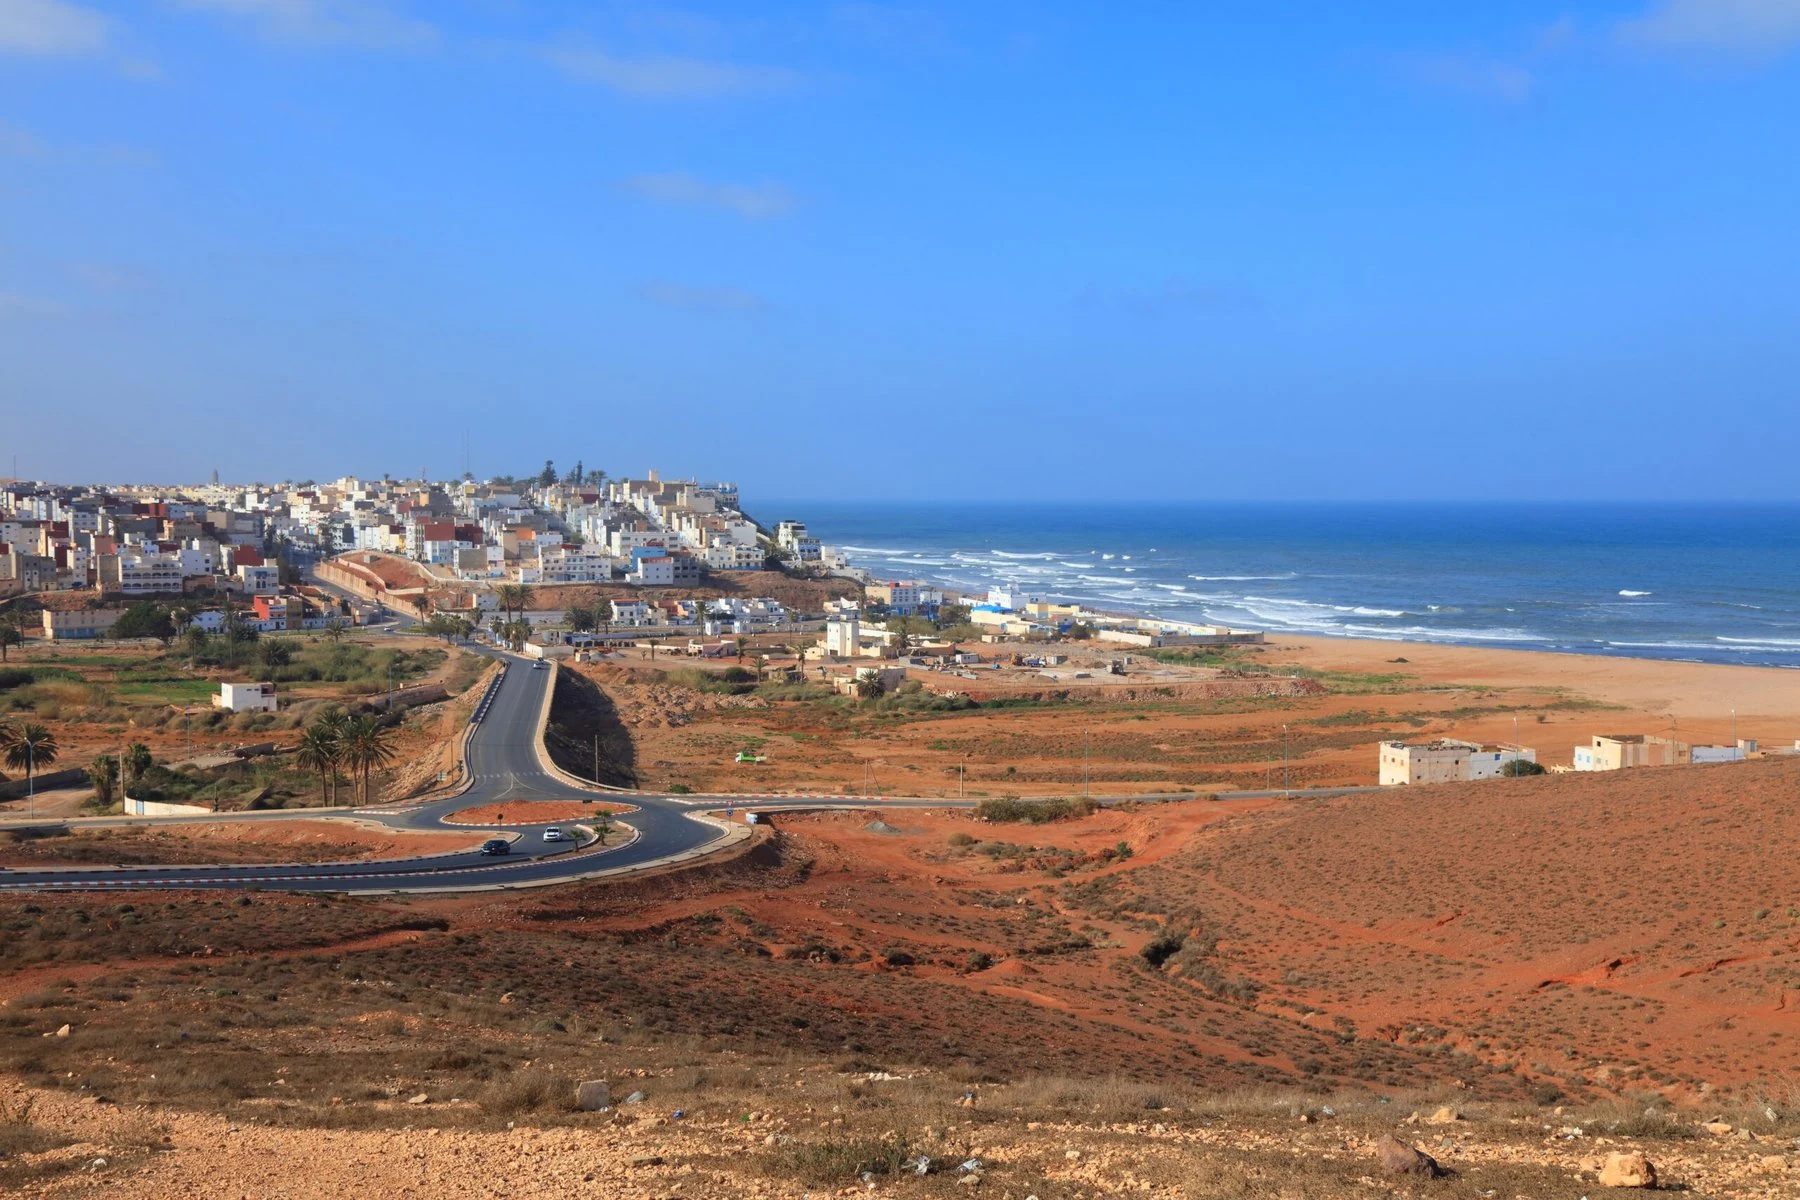 A view of the town of Sidi Ifni and the ocean.